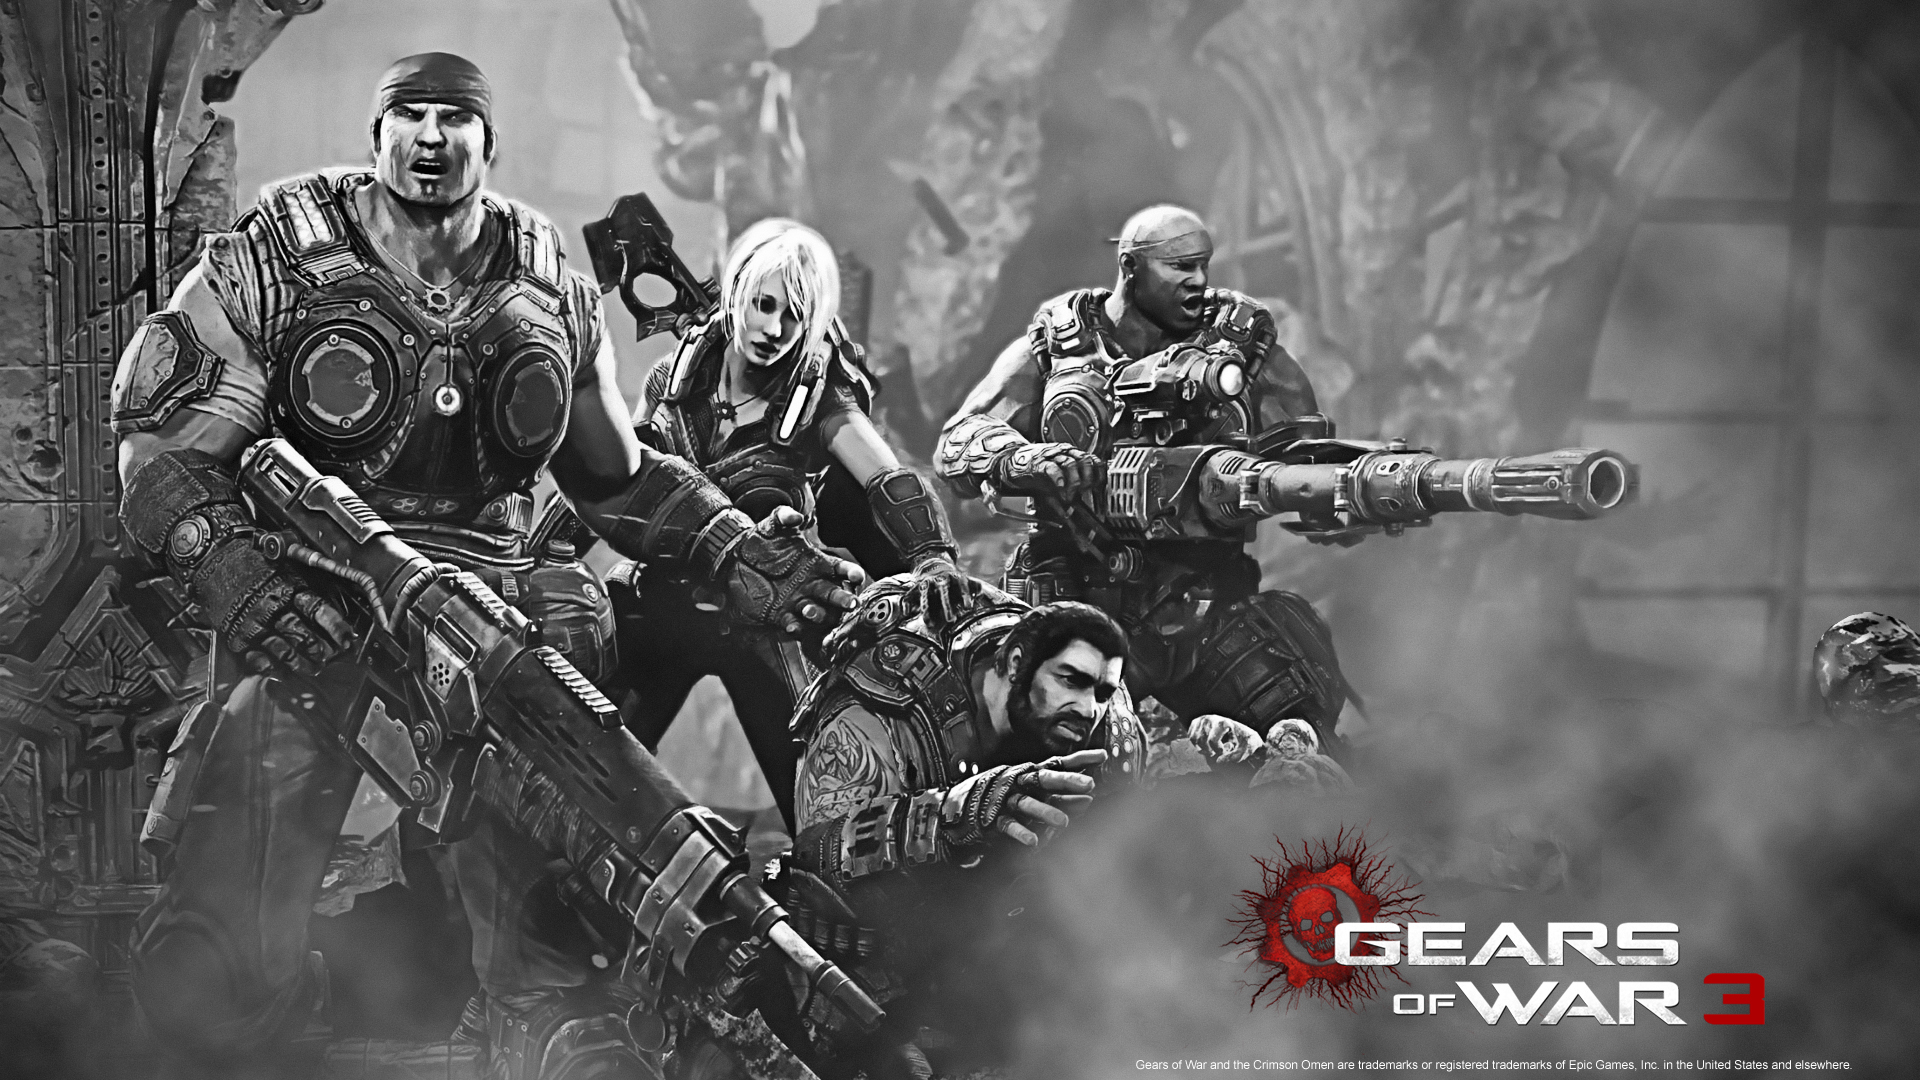 Gears of War 3 Gaming News and Game Reviews from MMGaming